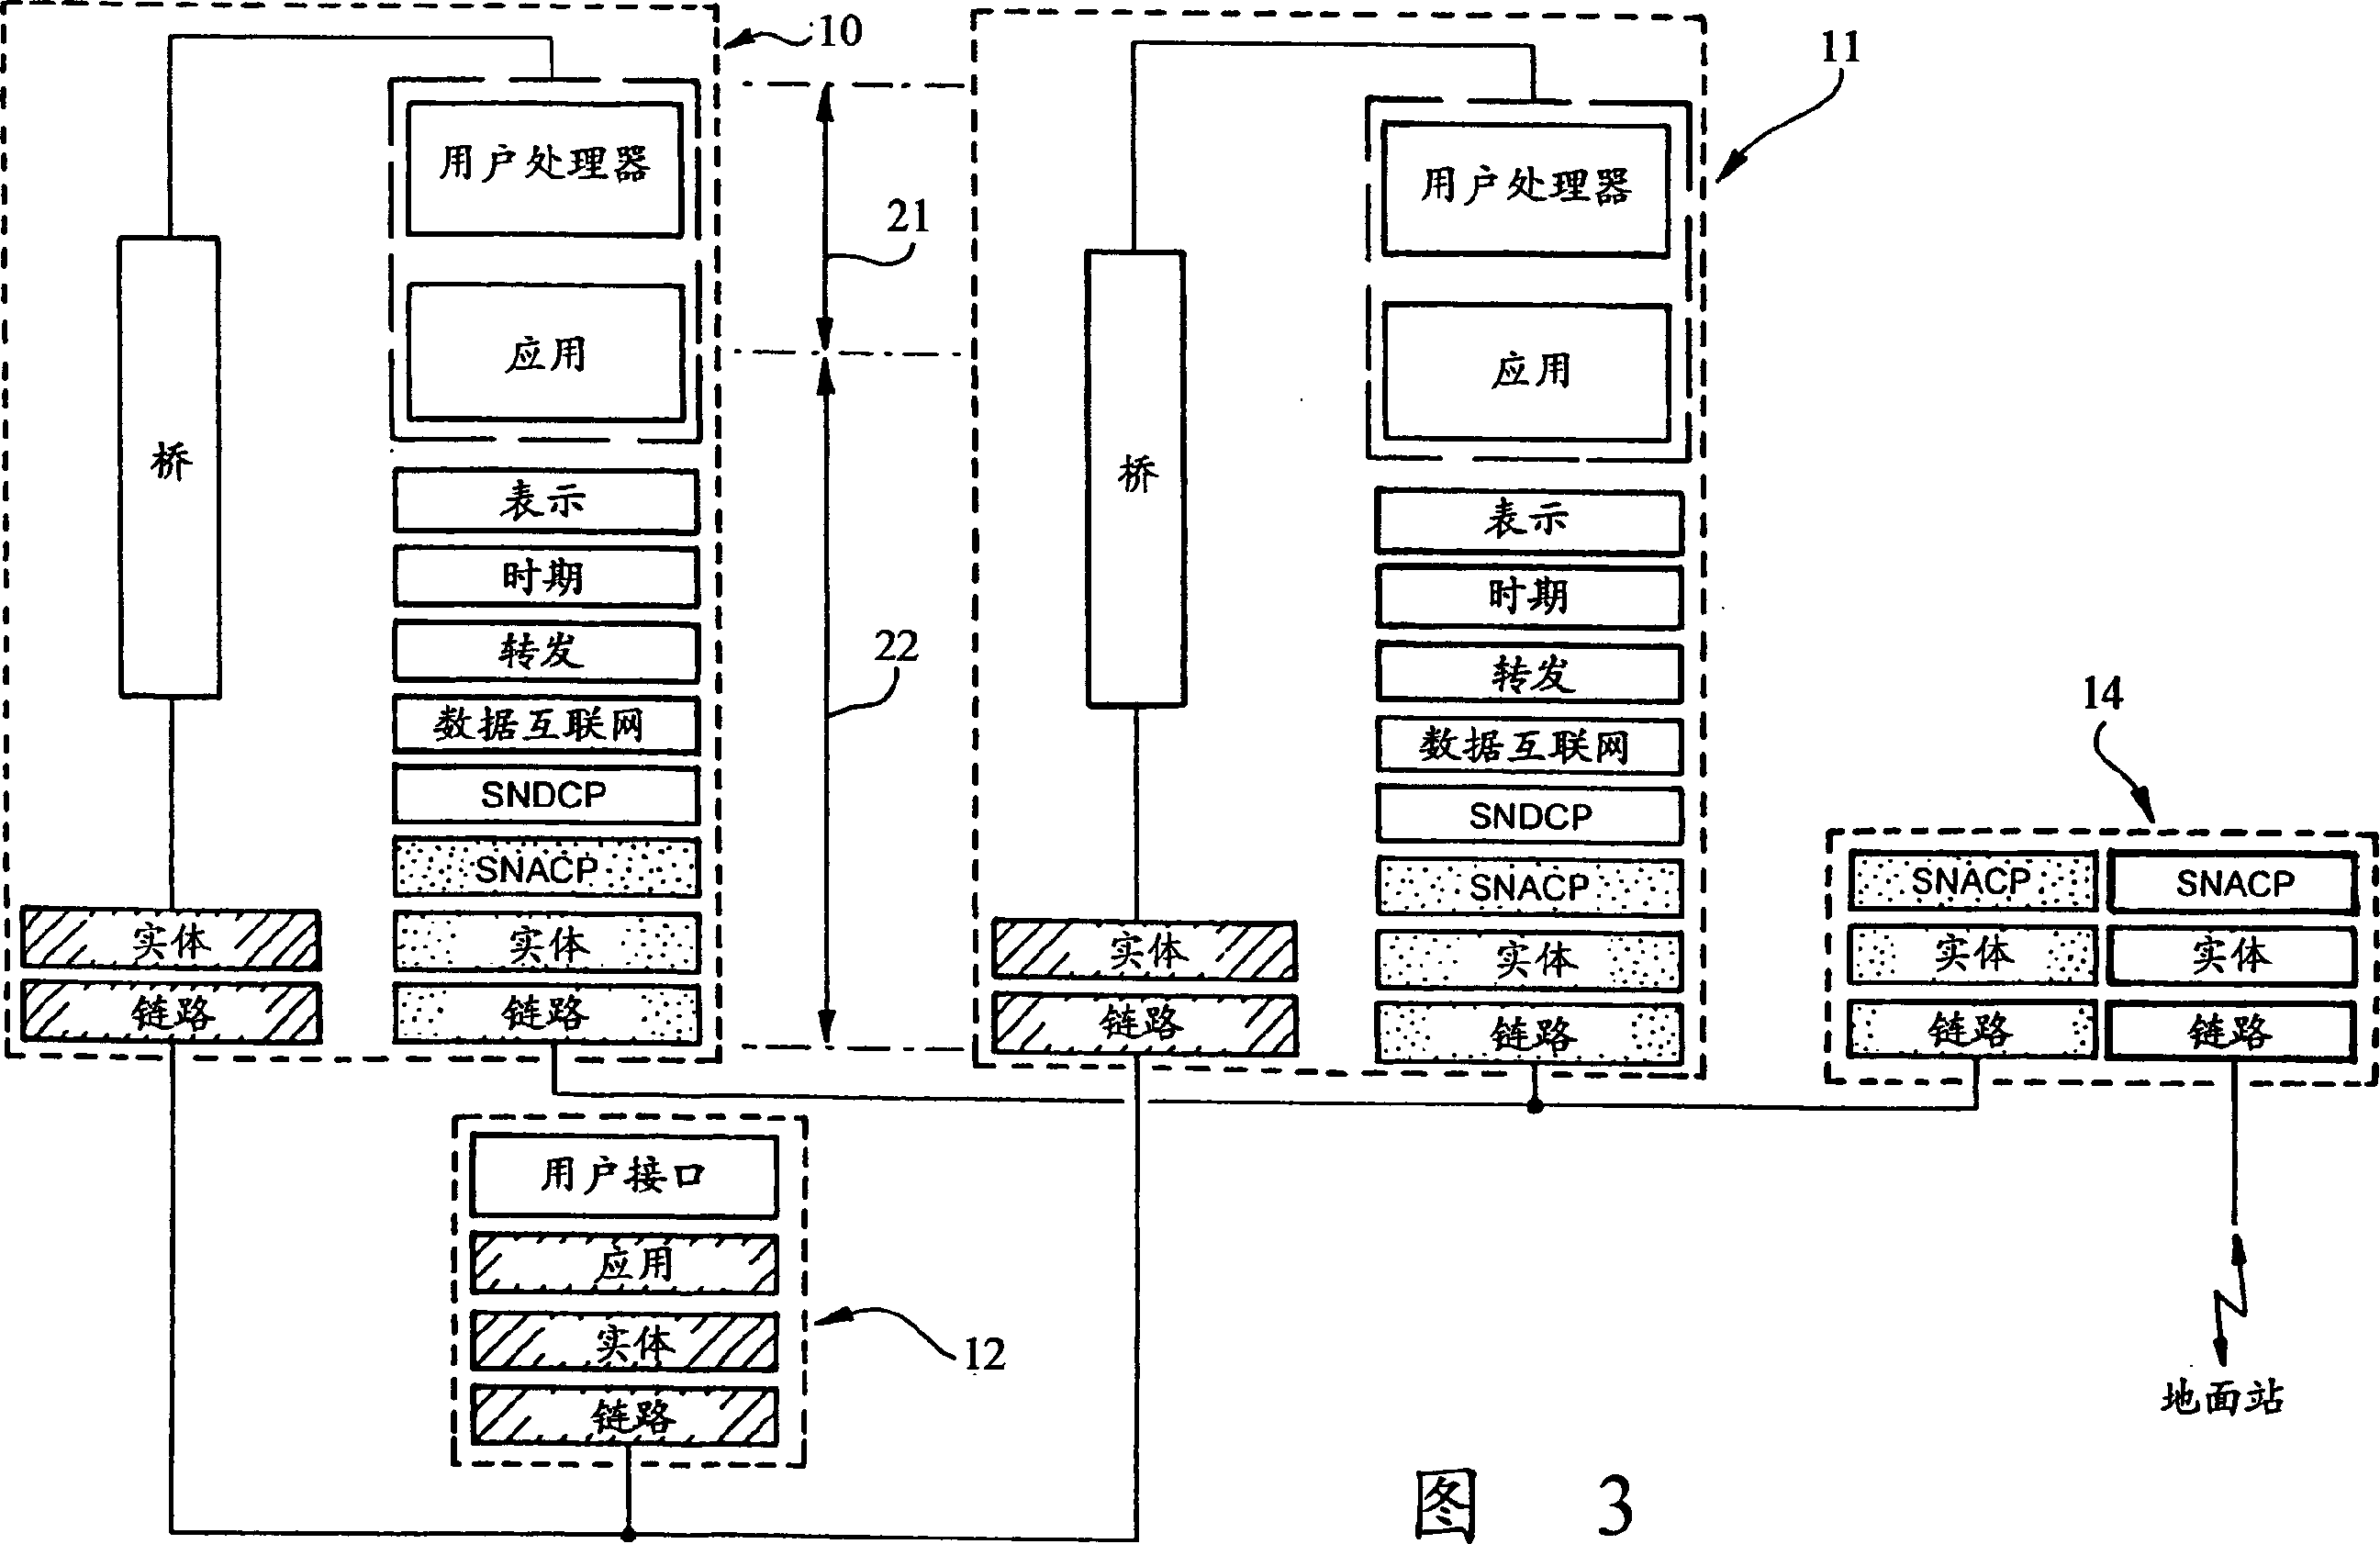 Data link system between aircraft and ground and procedure for recovering from failure